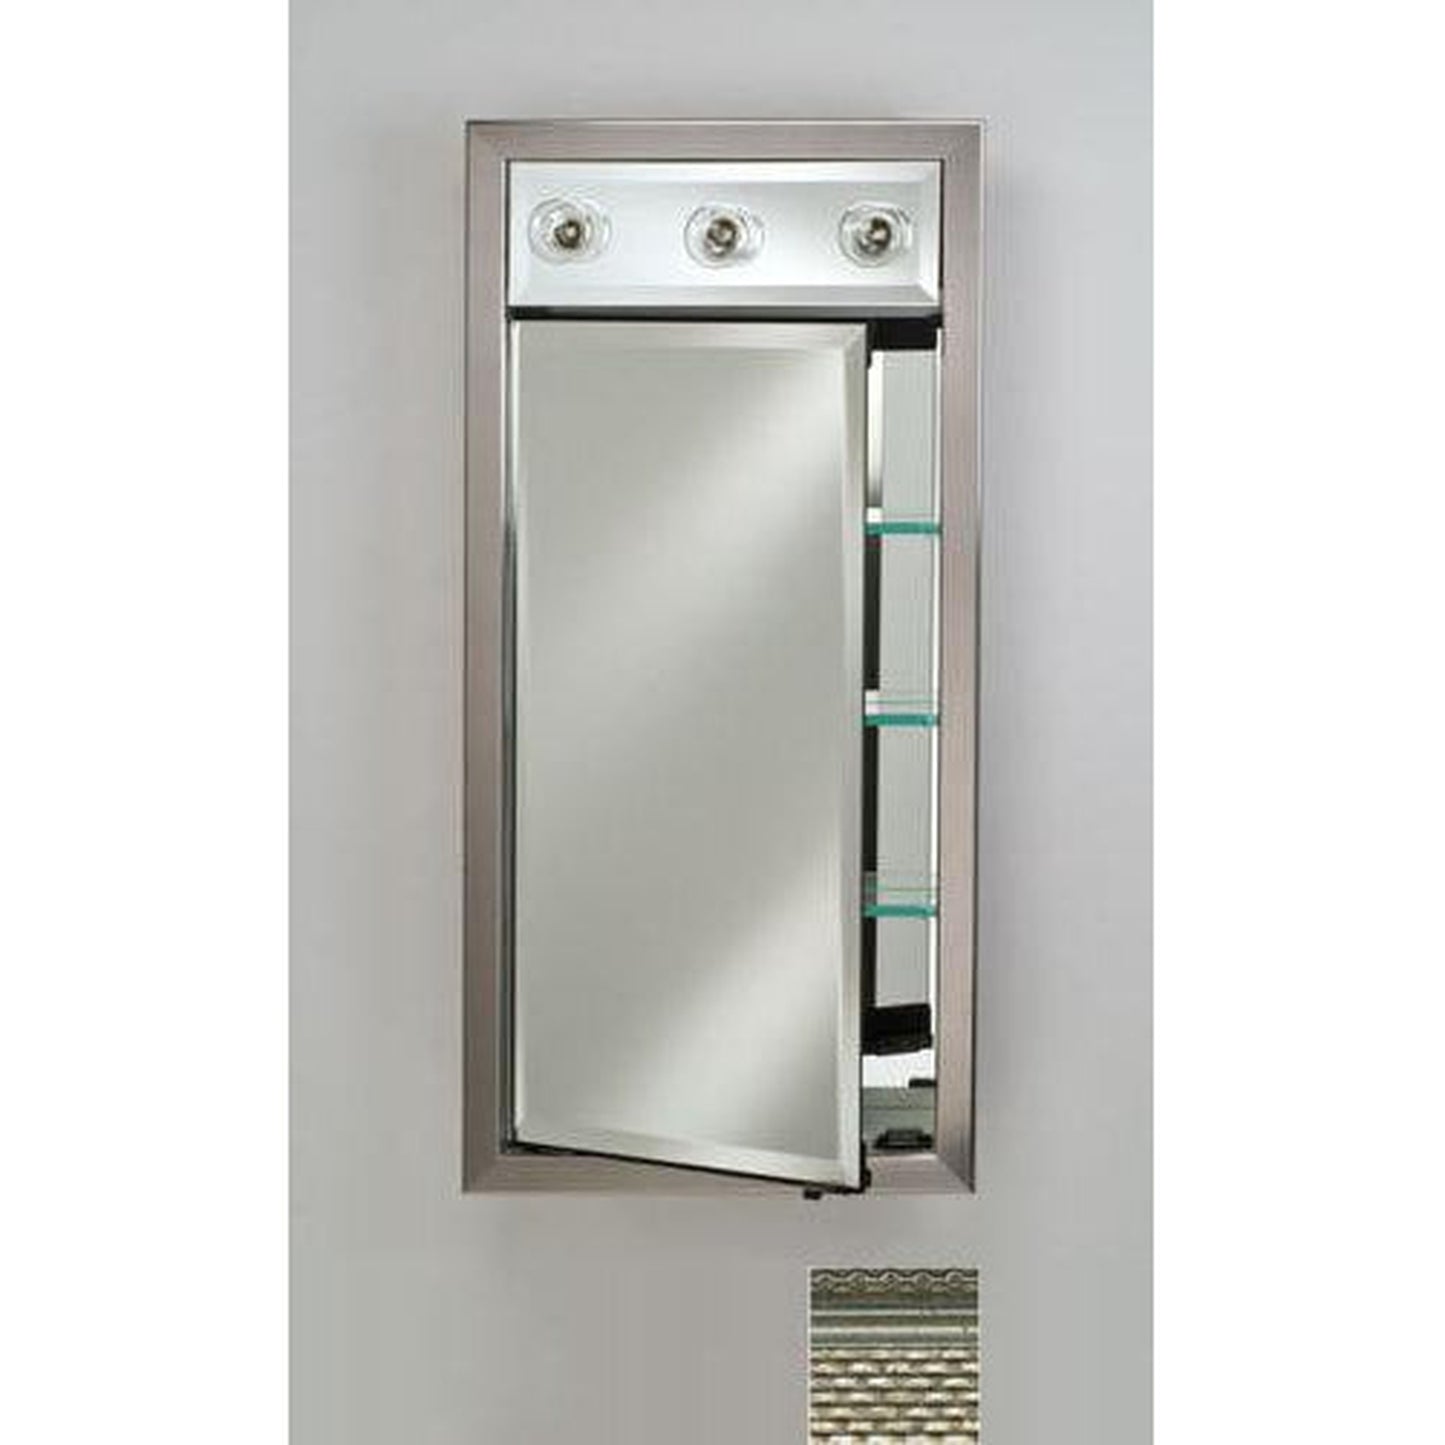 Afina Signature 17" x 30" Elegance Antique Silver Recessed Right Hinged Single Door Medicine Cabinet With Contemporary Lights